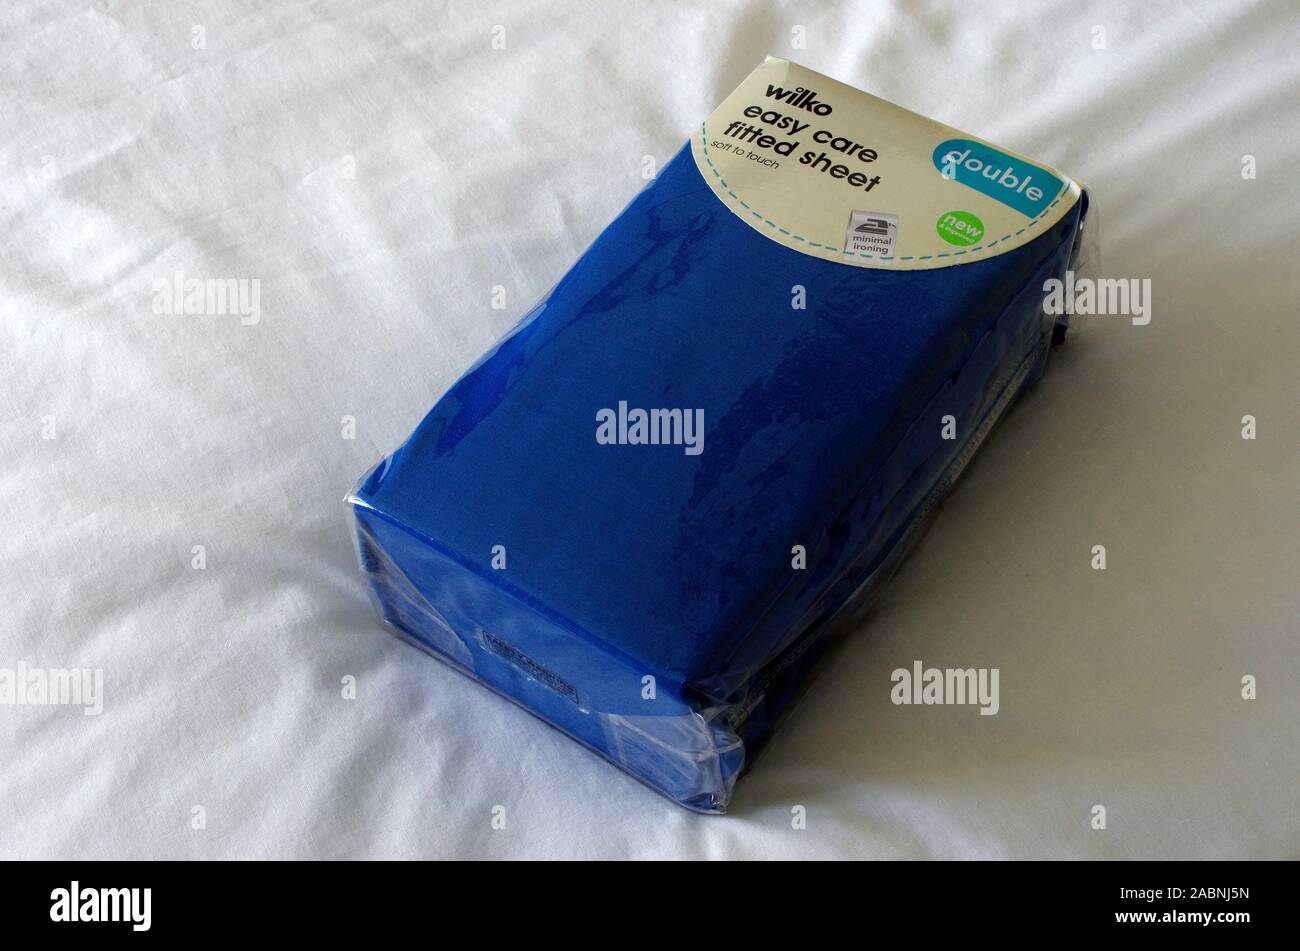 Wilko Easy Care Blue Cotton Fitted Double Sheet, UK Stock Photo